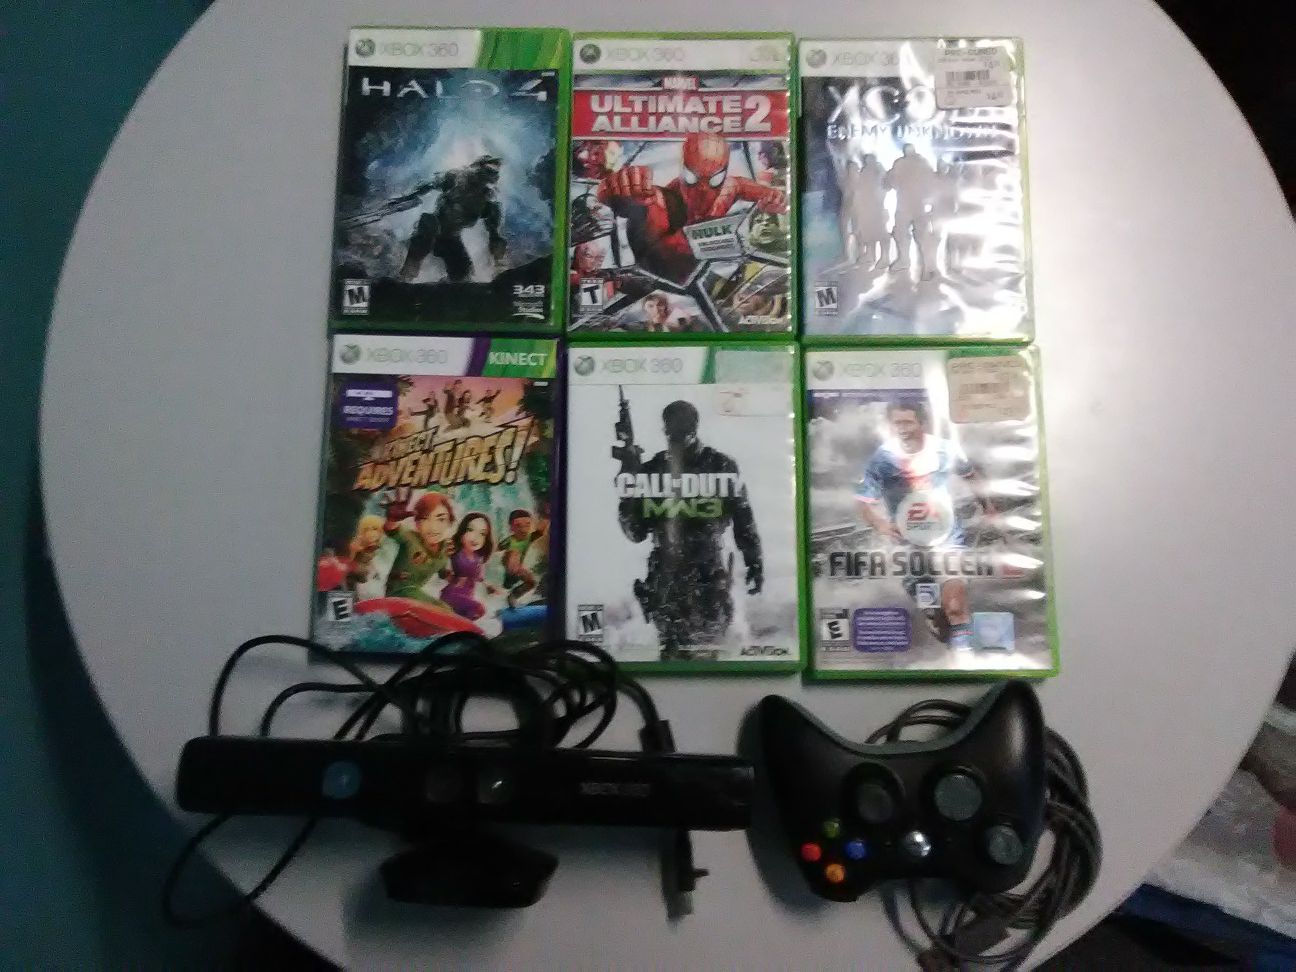 Xbox 360 Kinect Camera, Games, and Wired controller